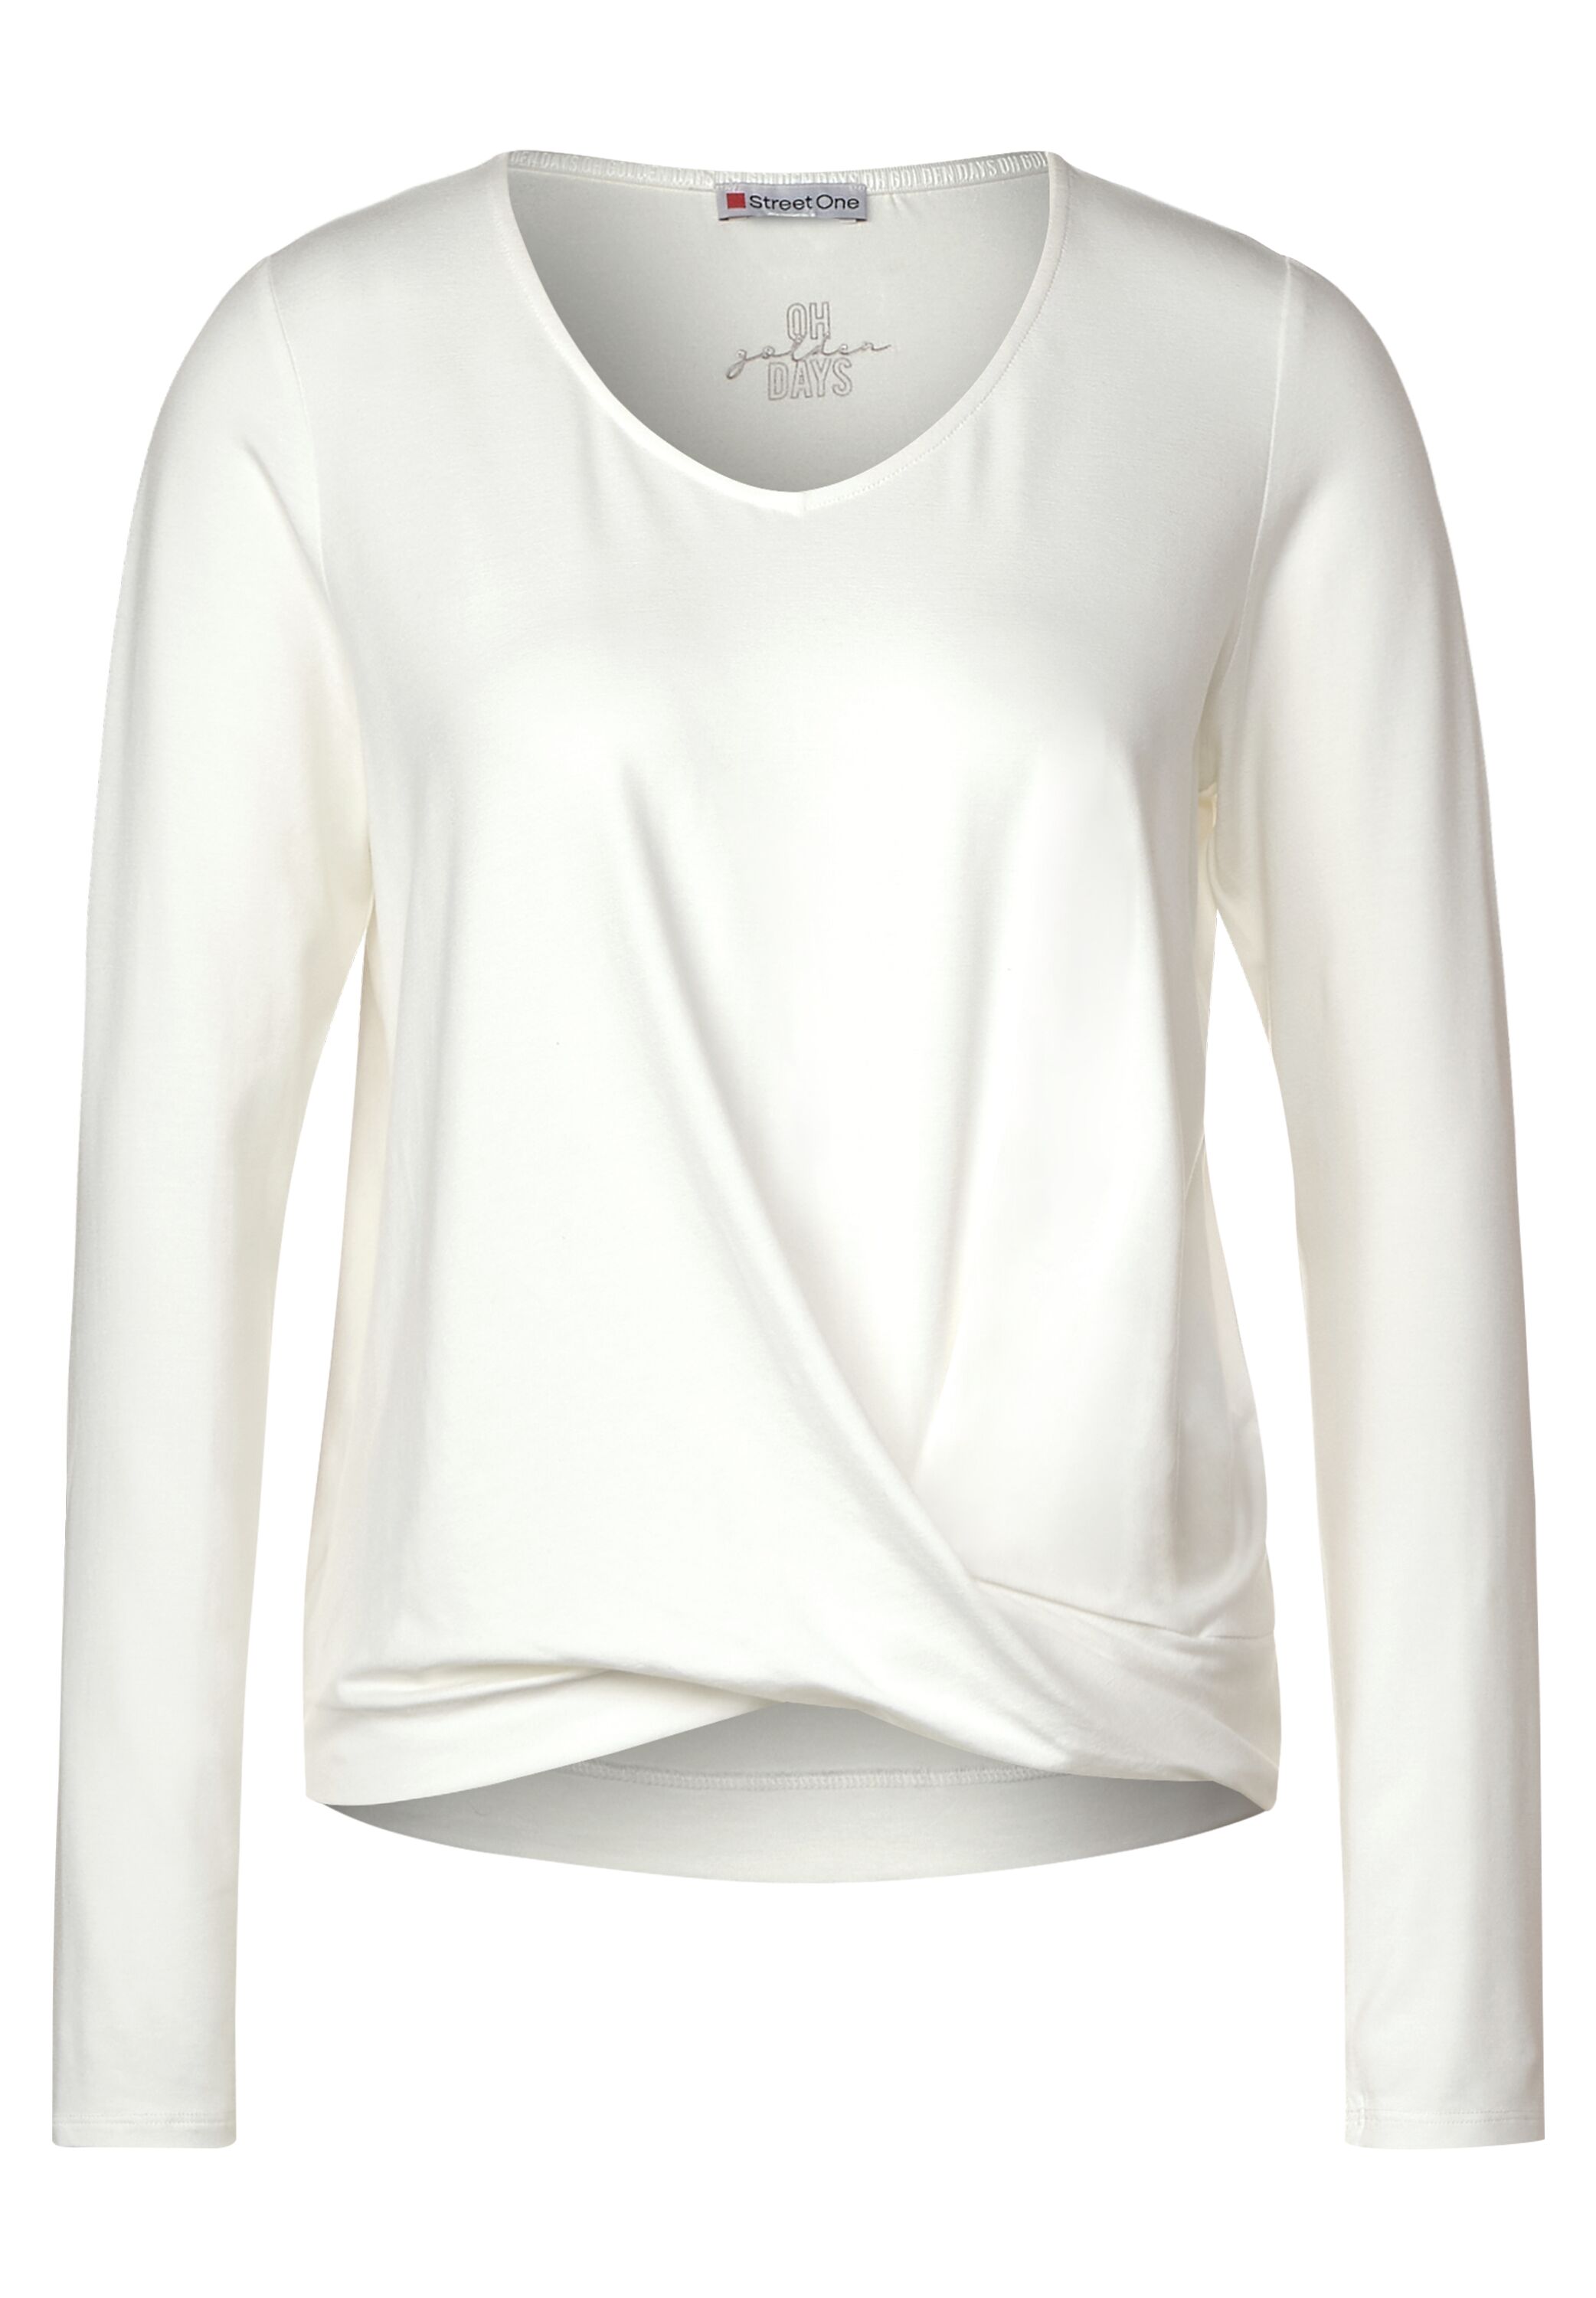 White One Street CONCEPT Off in Mode Shirt A315493-10108 -